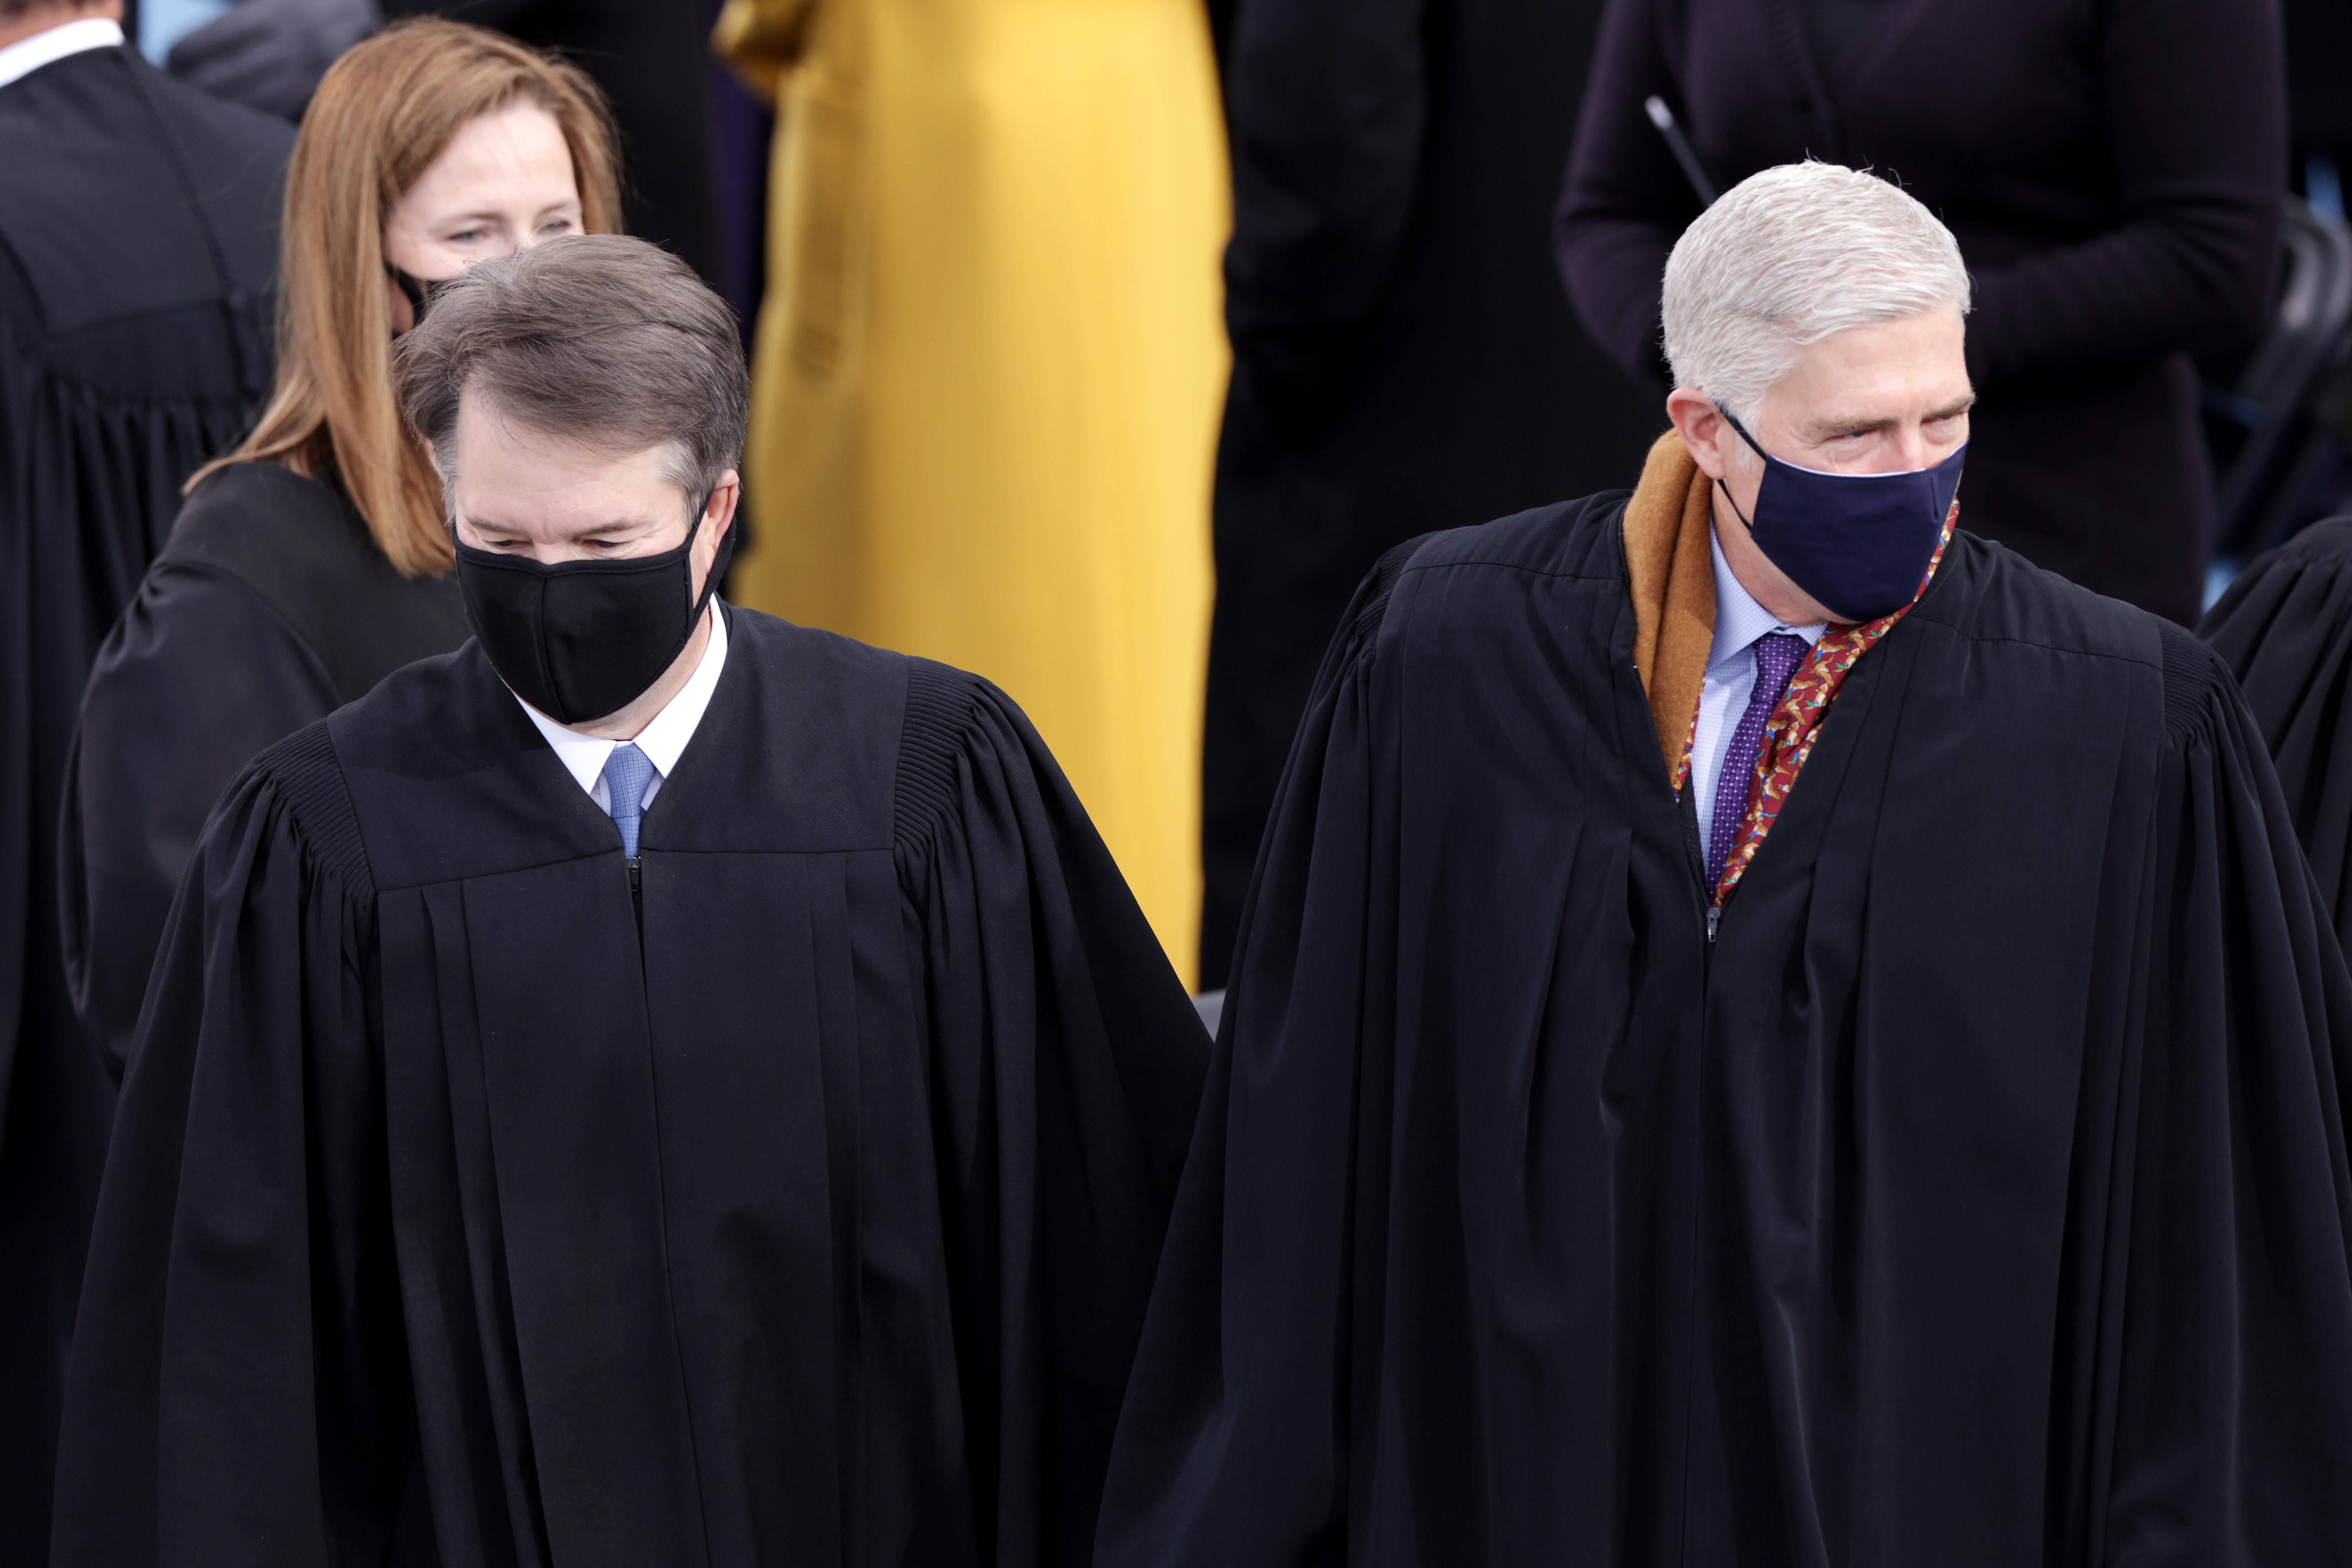 The three justices stand in their robes at Joe Biden's inauguration